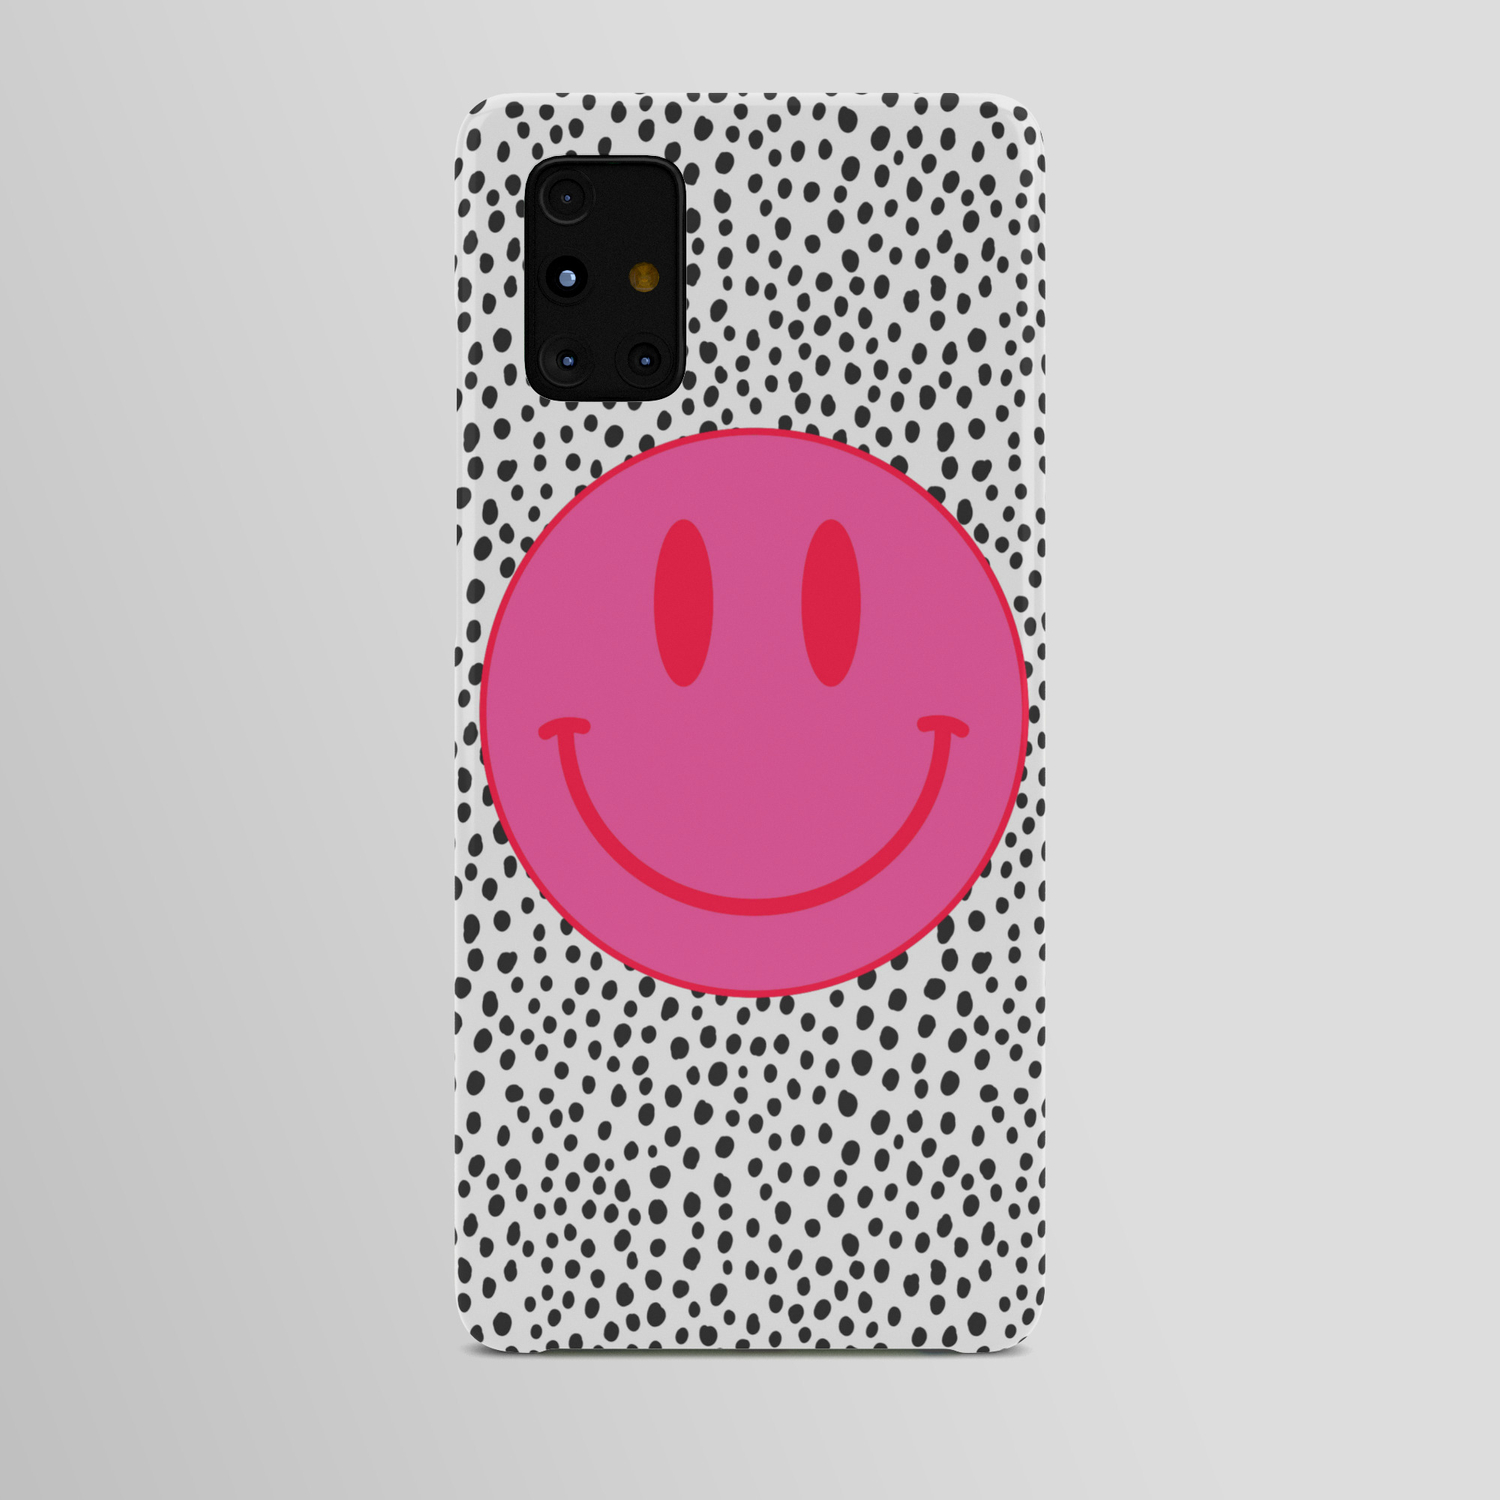 Make Me Smile - Cute Preppy Vsco Smiley Face on Black and White Android  Case by Aesthetics by Shan Boujee | Society6